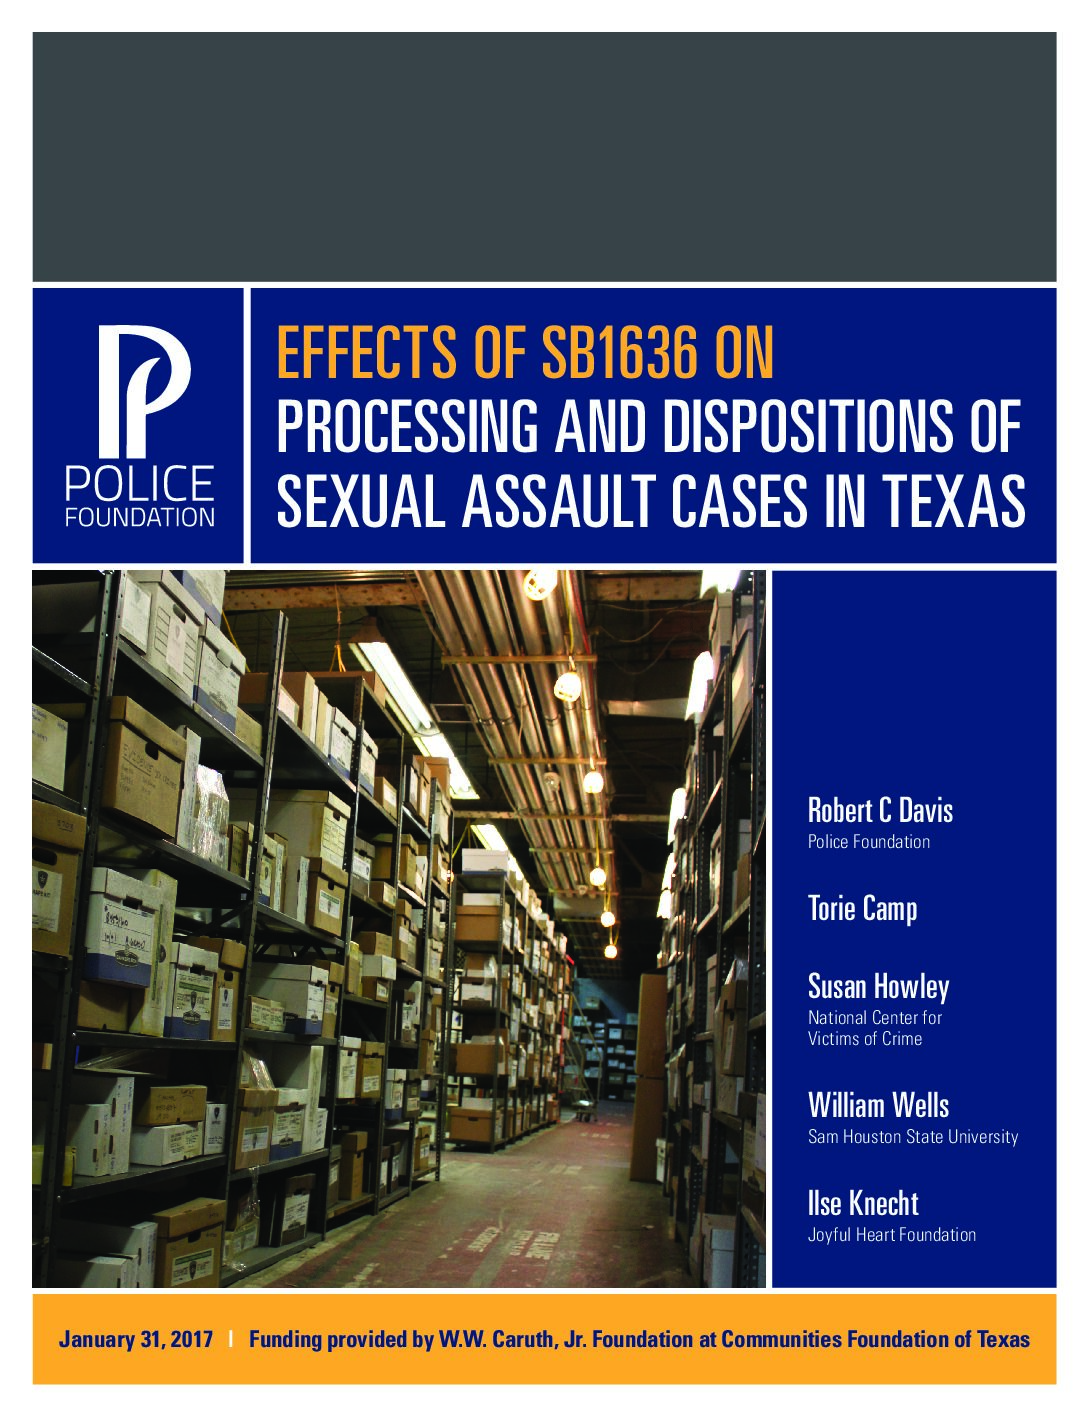 PF_Effects-of-SB1636-on-Processing-and-Dispositions-of-Sexual-Assault-Cases-in-Texas pdf